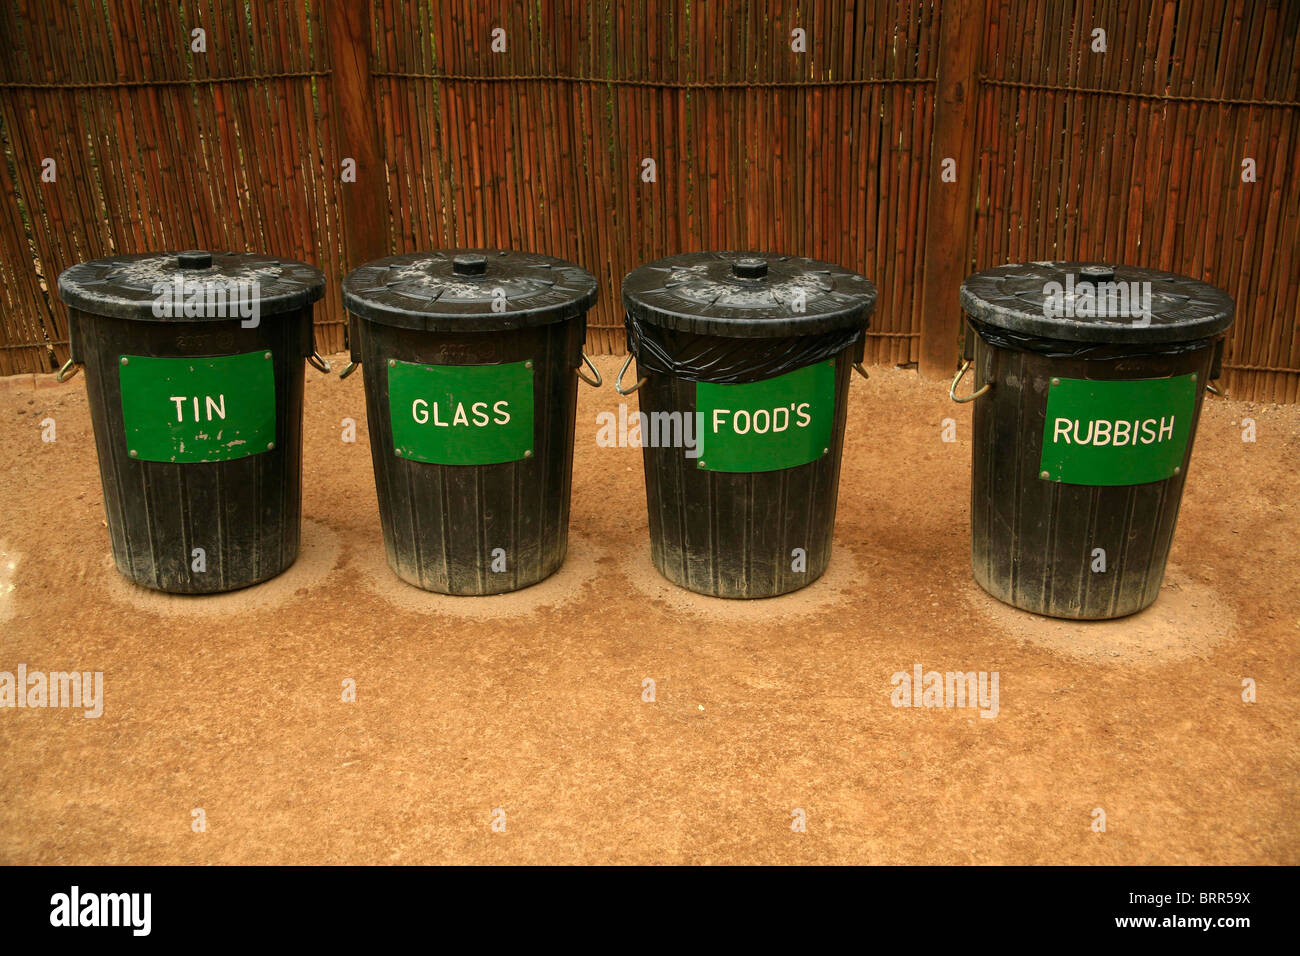 A row of recycling bins for tins, glass, food waste and unclassified rubbish Stock Photo